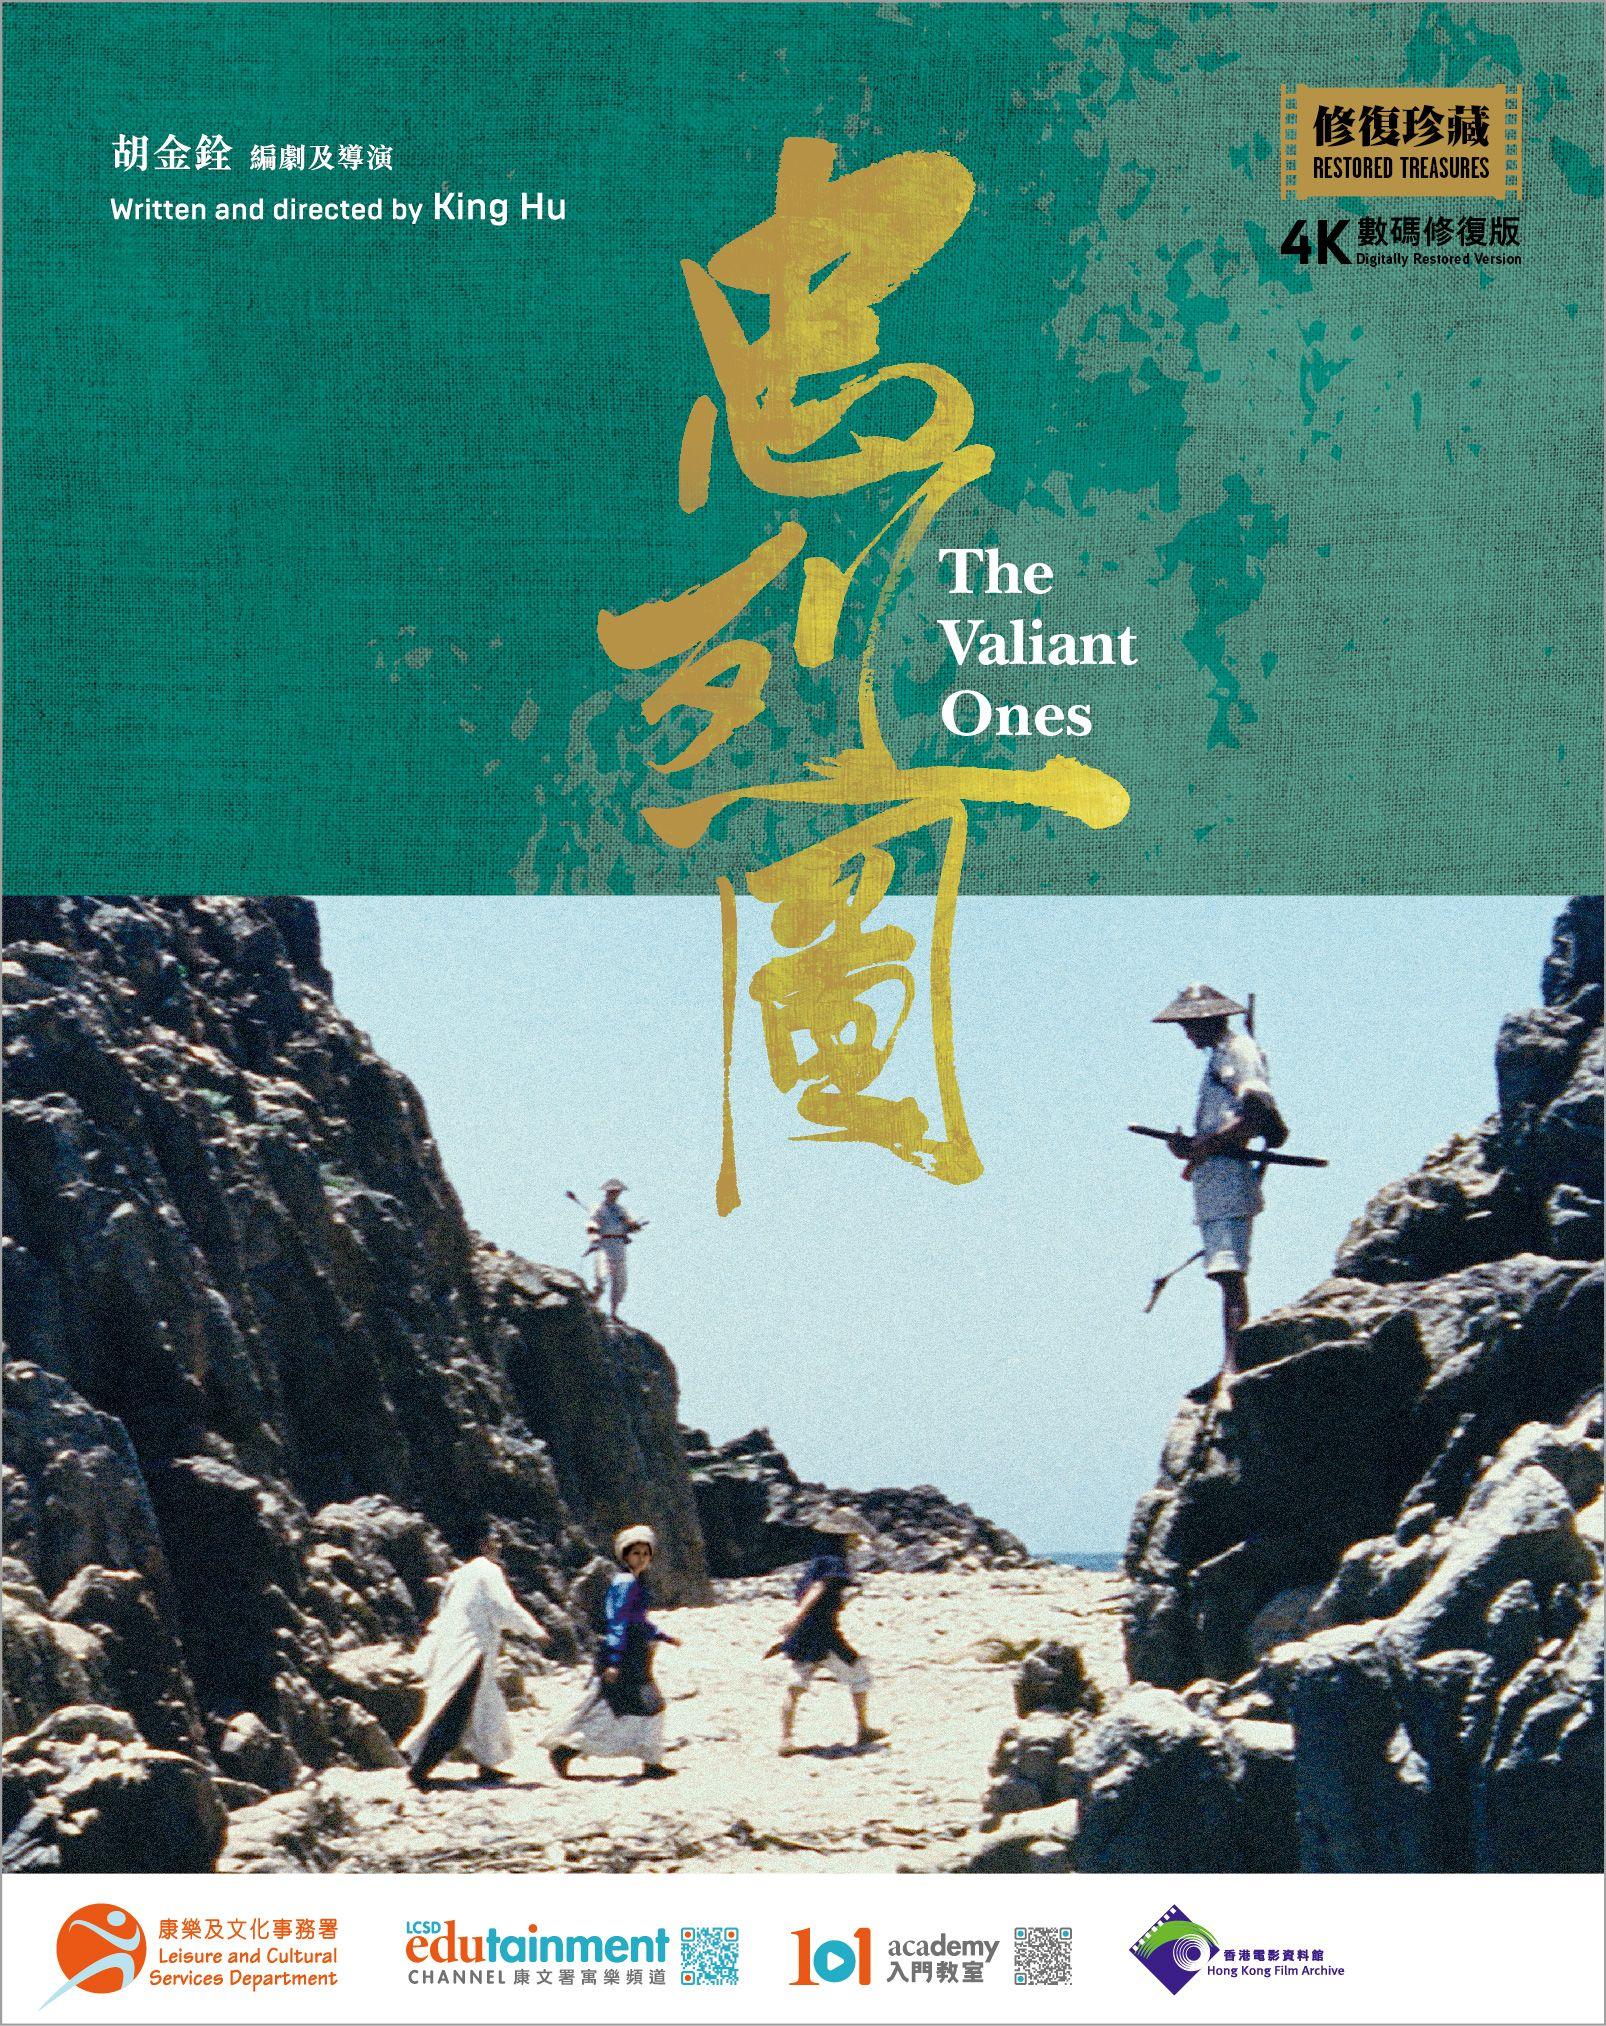 The 4K digitally restored version Blu-ray discs of "The Valiant Ones" (1975), which is a collection item of the Hong Kong Film Archive of the Leisure and Cultural Services Department, are now on sale. "The Valiant Ones" was filmed by King Hu as the director, screenwriter and producer, and featured actors Hsu Feng, Bai Ying and Roy Chiao. Photo shows the cover of the Blu-ray disc. 